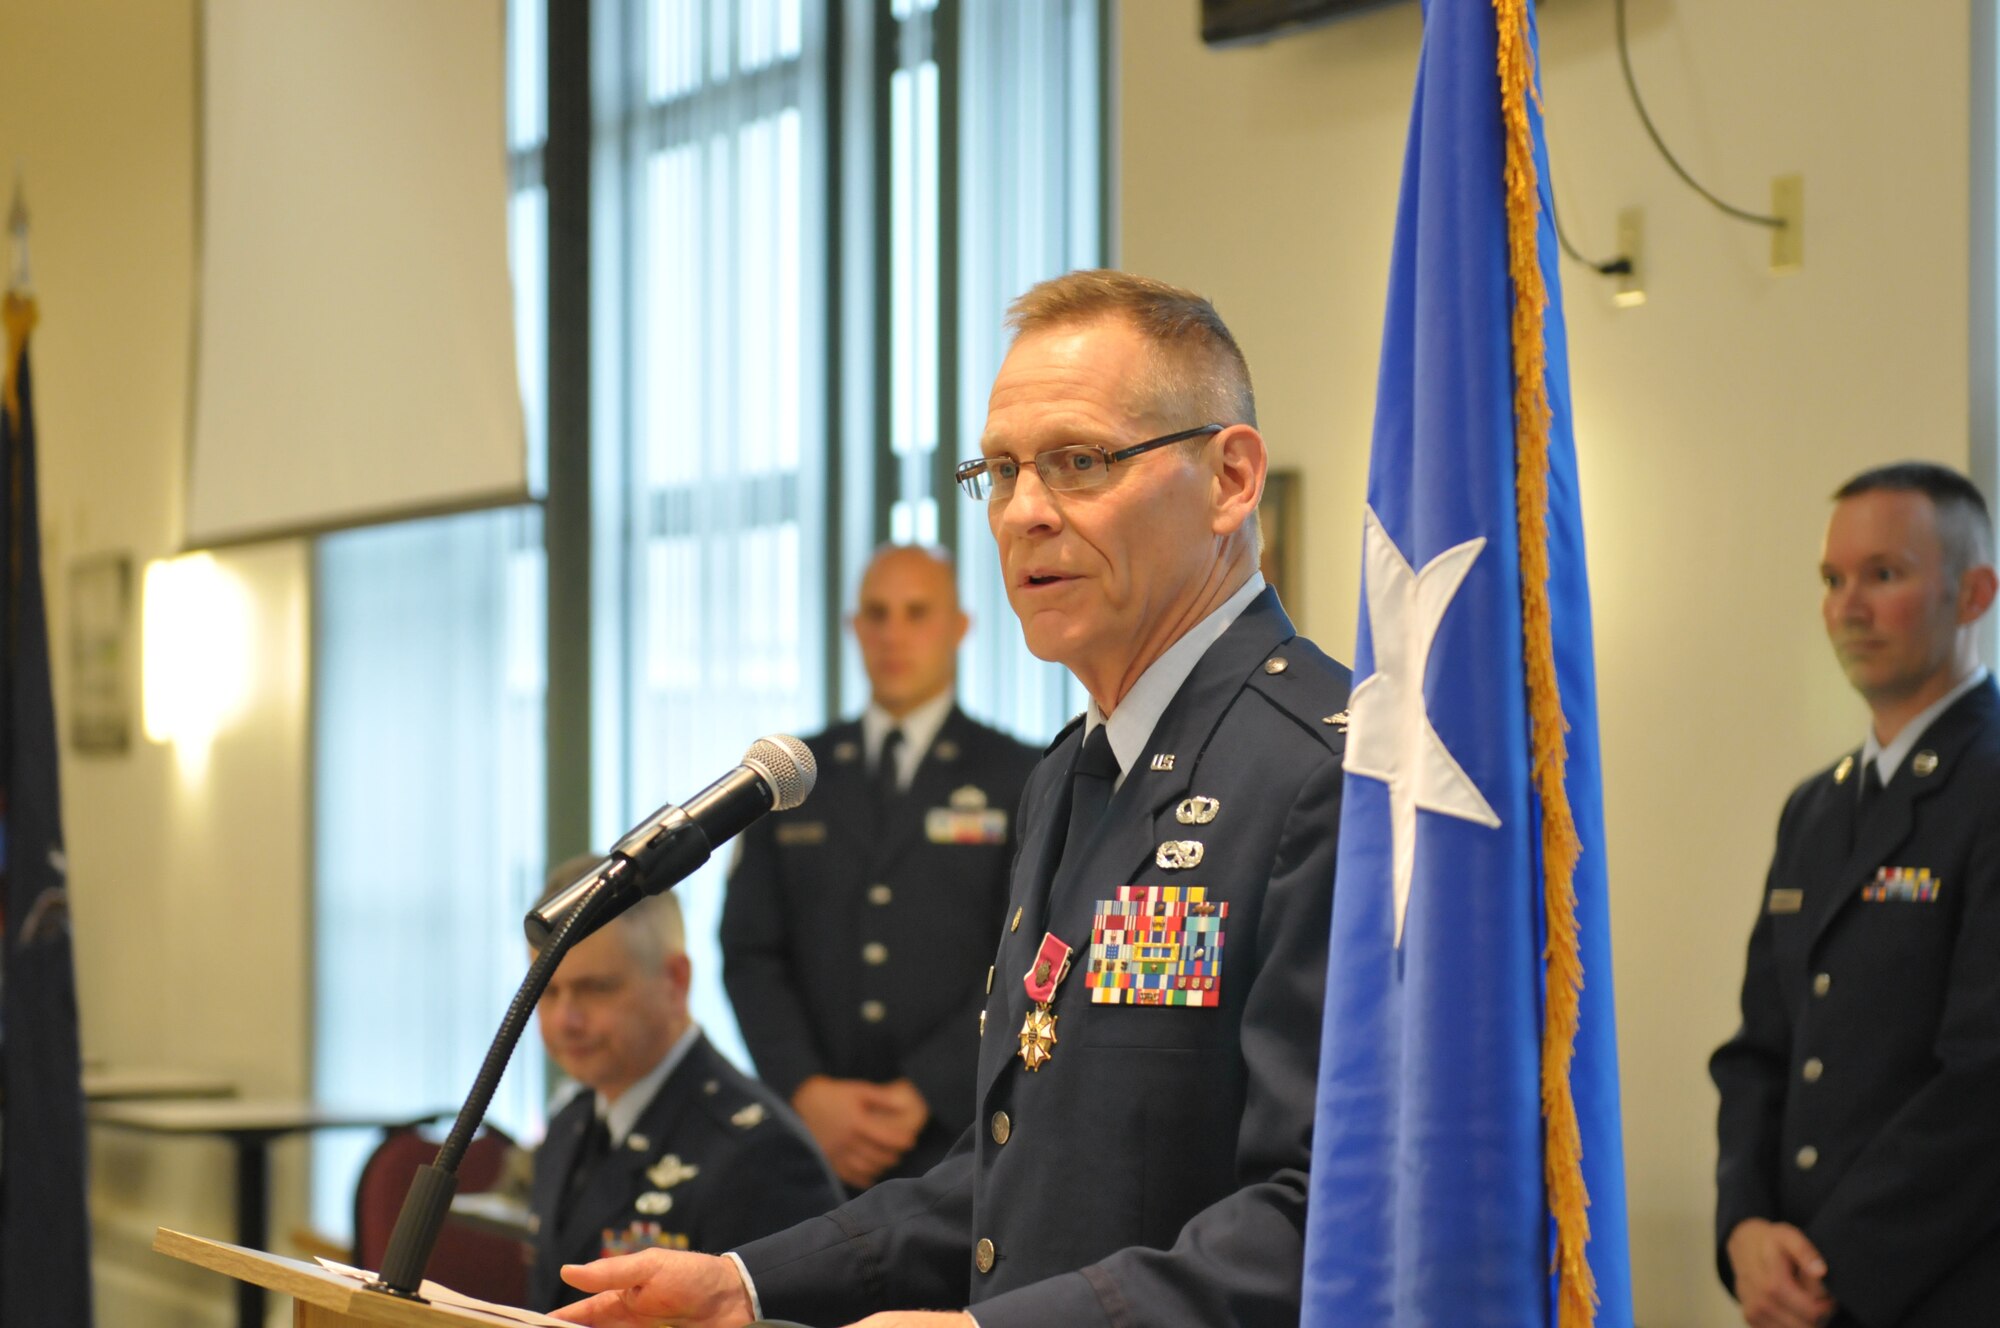 Col. Walter Wintsch retired in a ceremony Sept. 13, 2014, at Stratton Air National Guard Base, N.Y., after nearly 40 years of service. Before retiring, he relinquished command of the 109th Mission Support Group to Lt. Col. Jeffrey Hedges.  (U.S. Air National Guard photo by Master Sgt. William Gizara/Released)